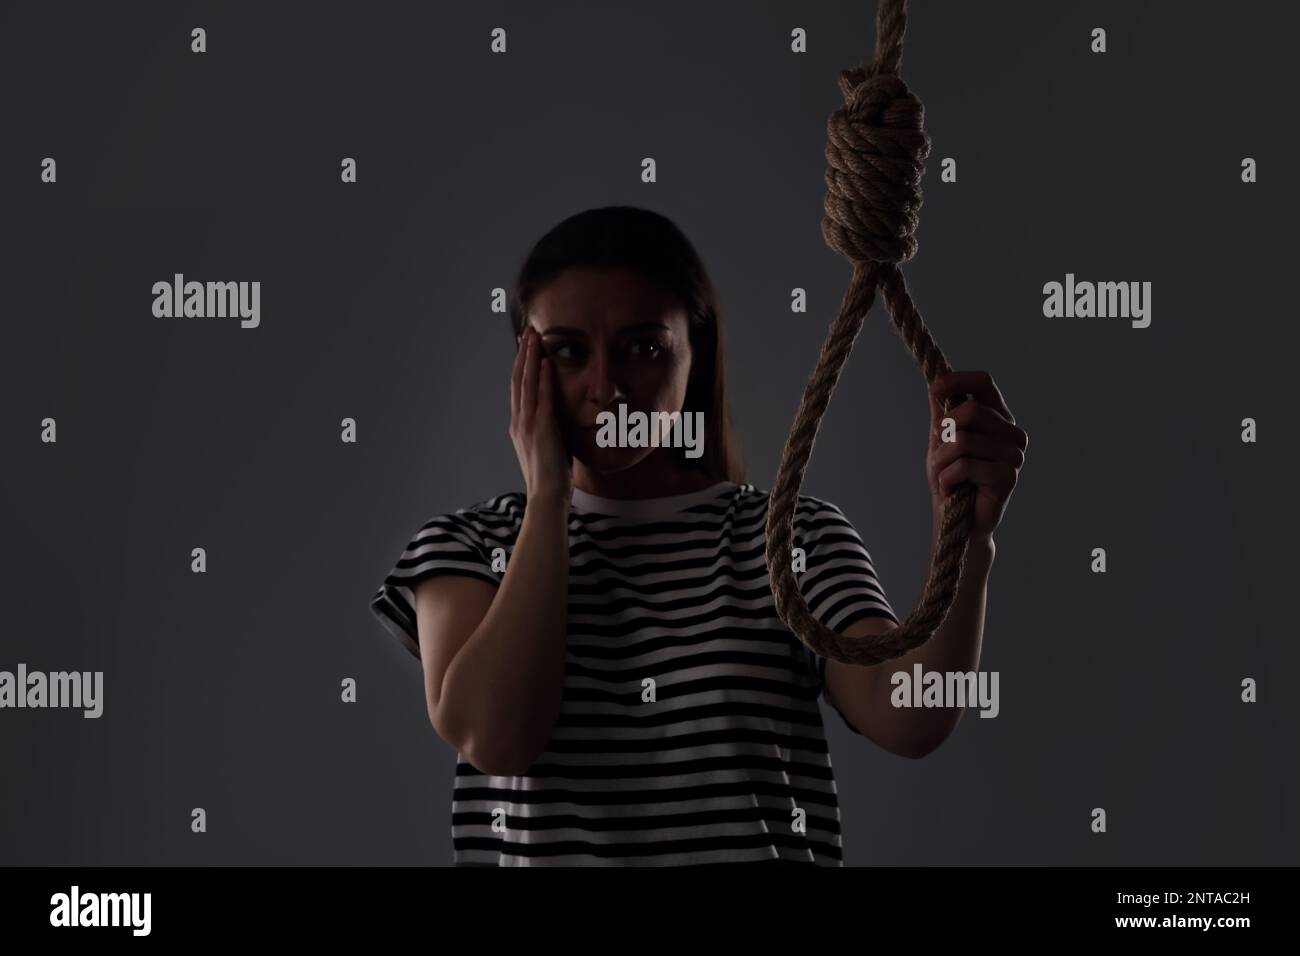 Depressed woman with rope noose on grey background Stock Photo